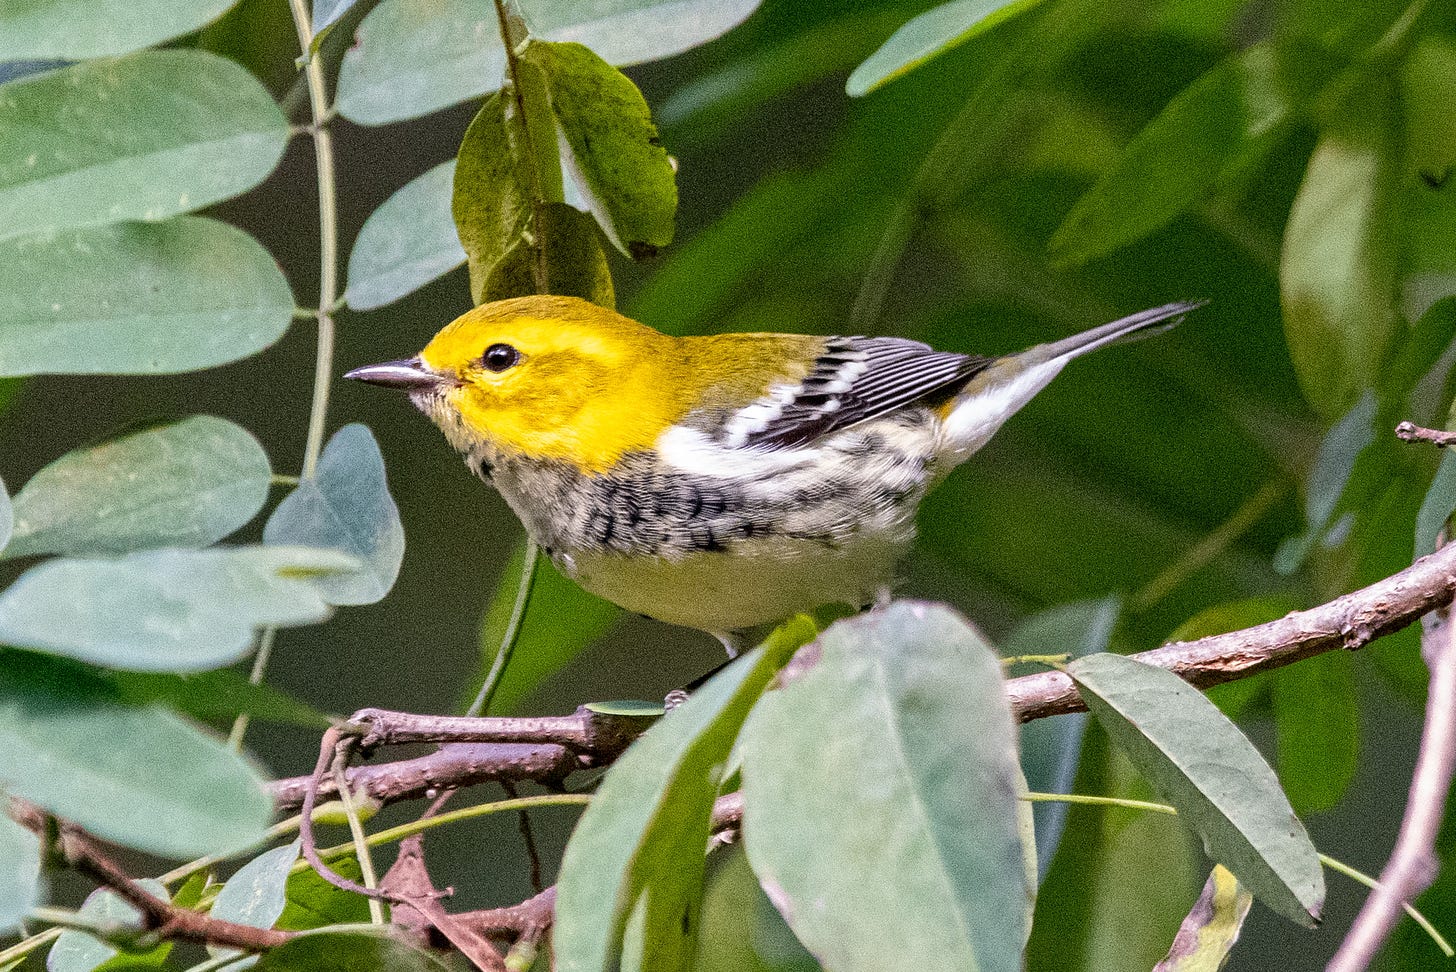 A close-up of a black-throated green warbler, with a bright yellow face